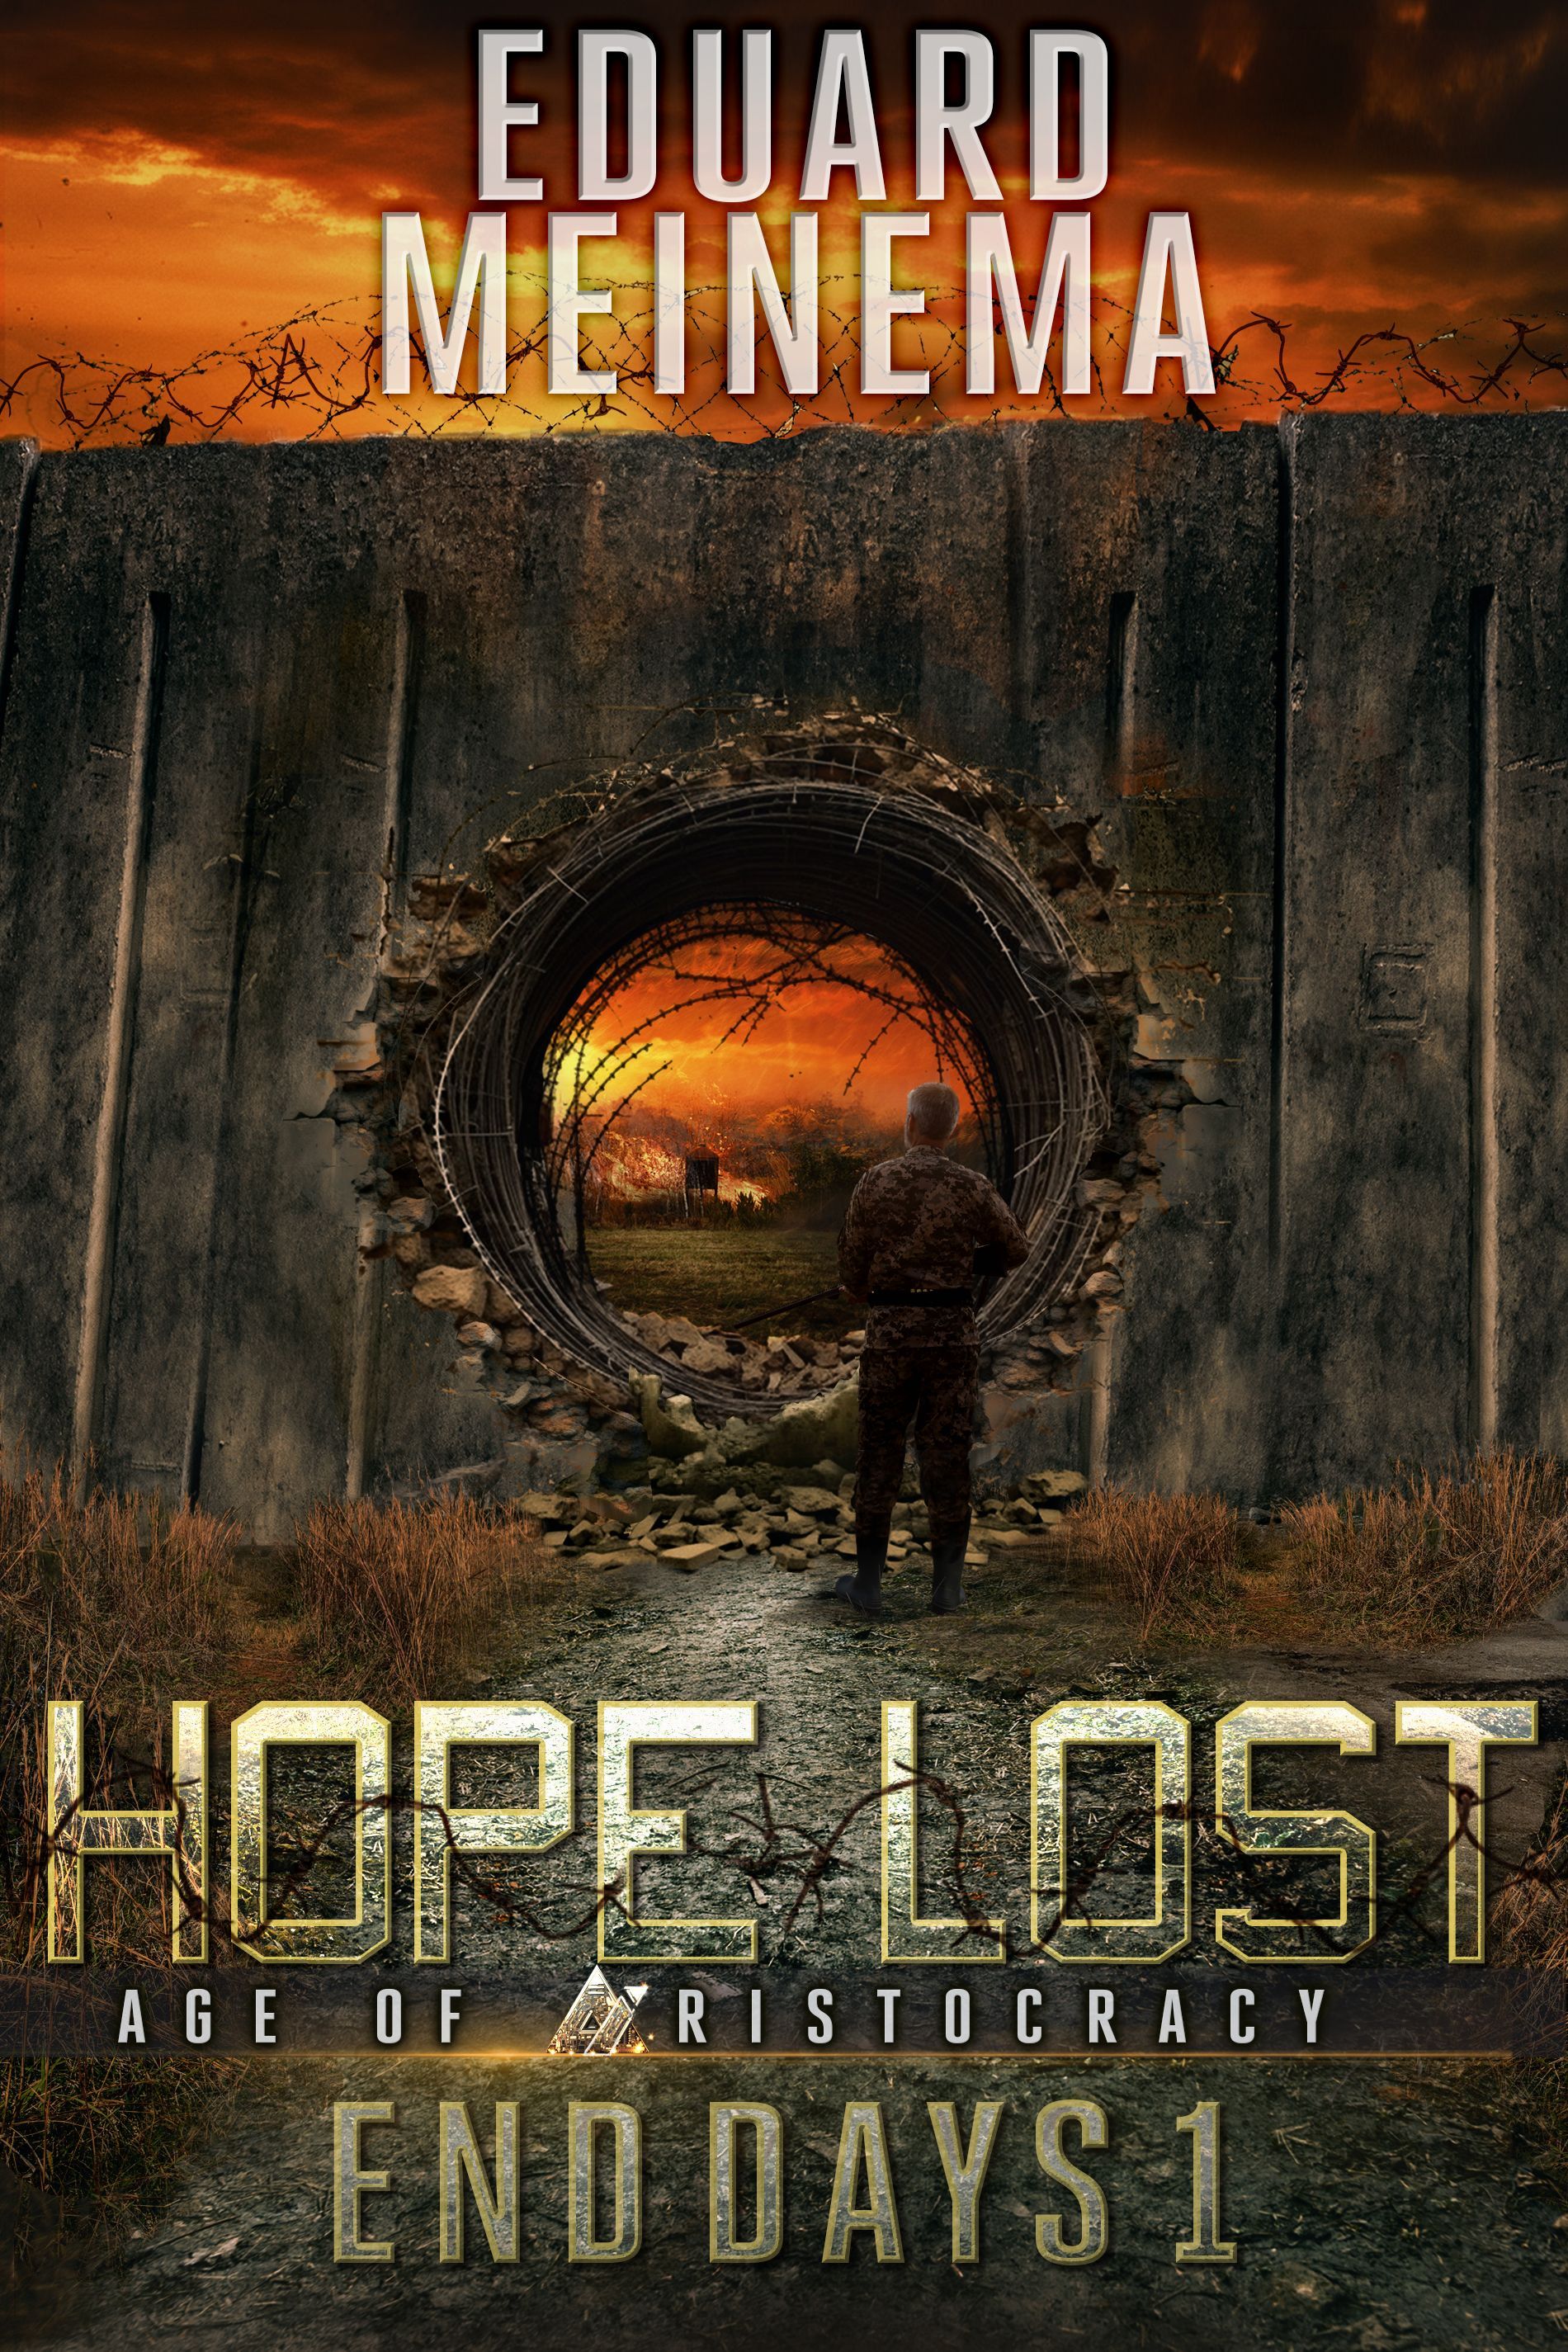 Hope Lost, END DAYS Book 1 by Eduard Meinema